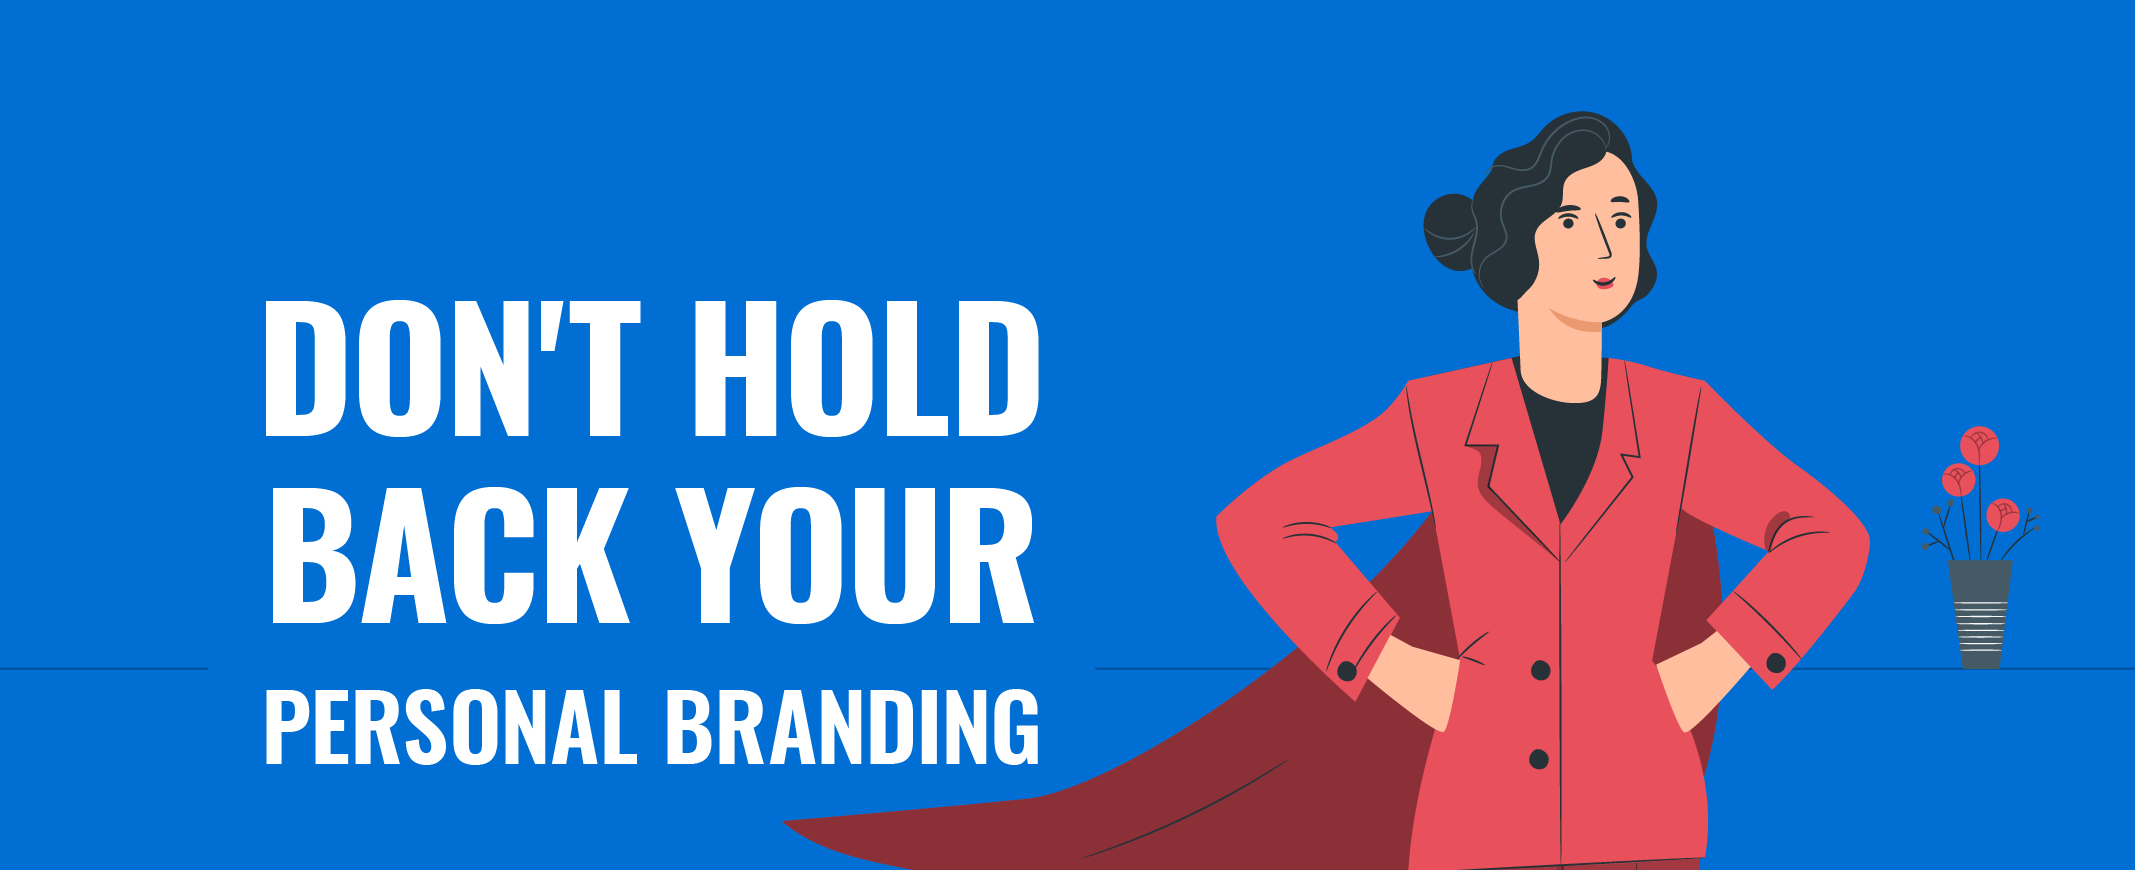 Don’t Hold Back Your Personal Branding